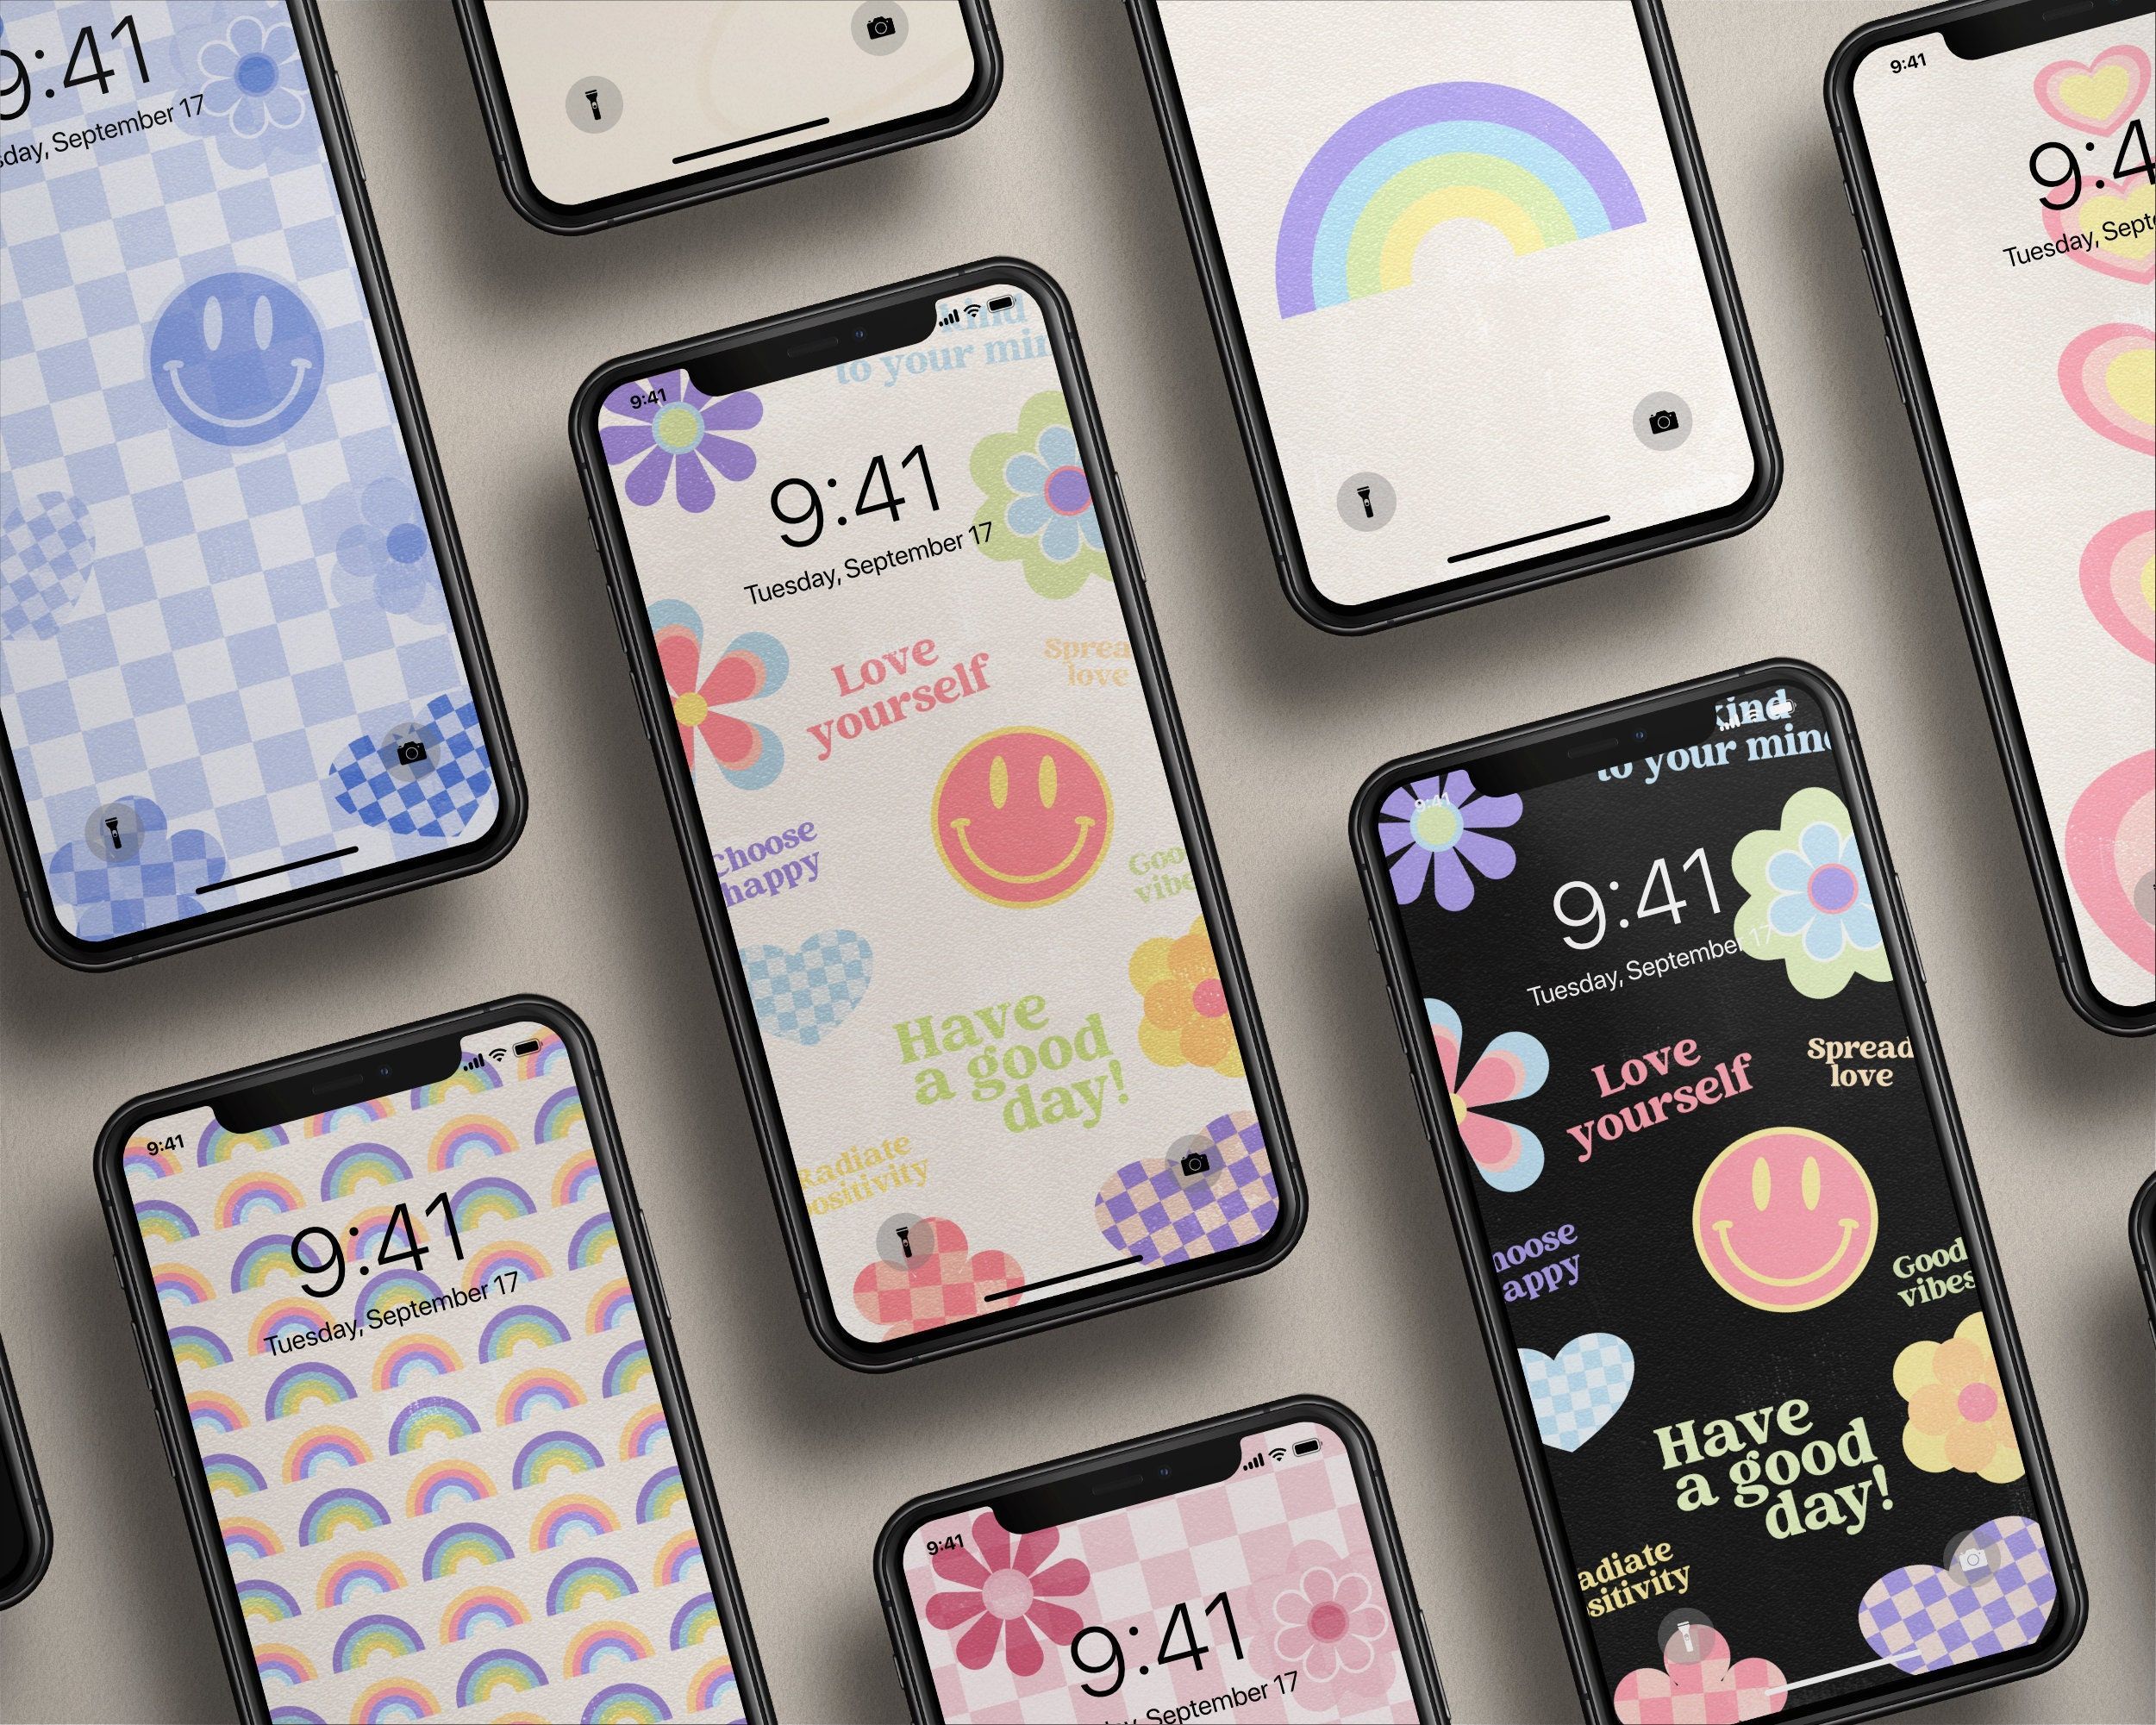 A group of phones with different designs on them - 